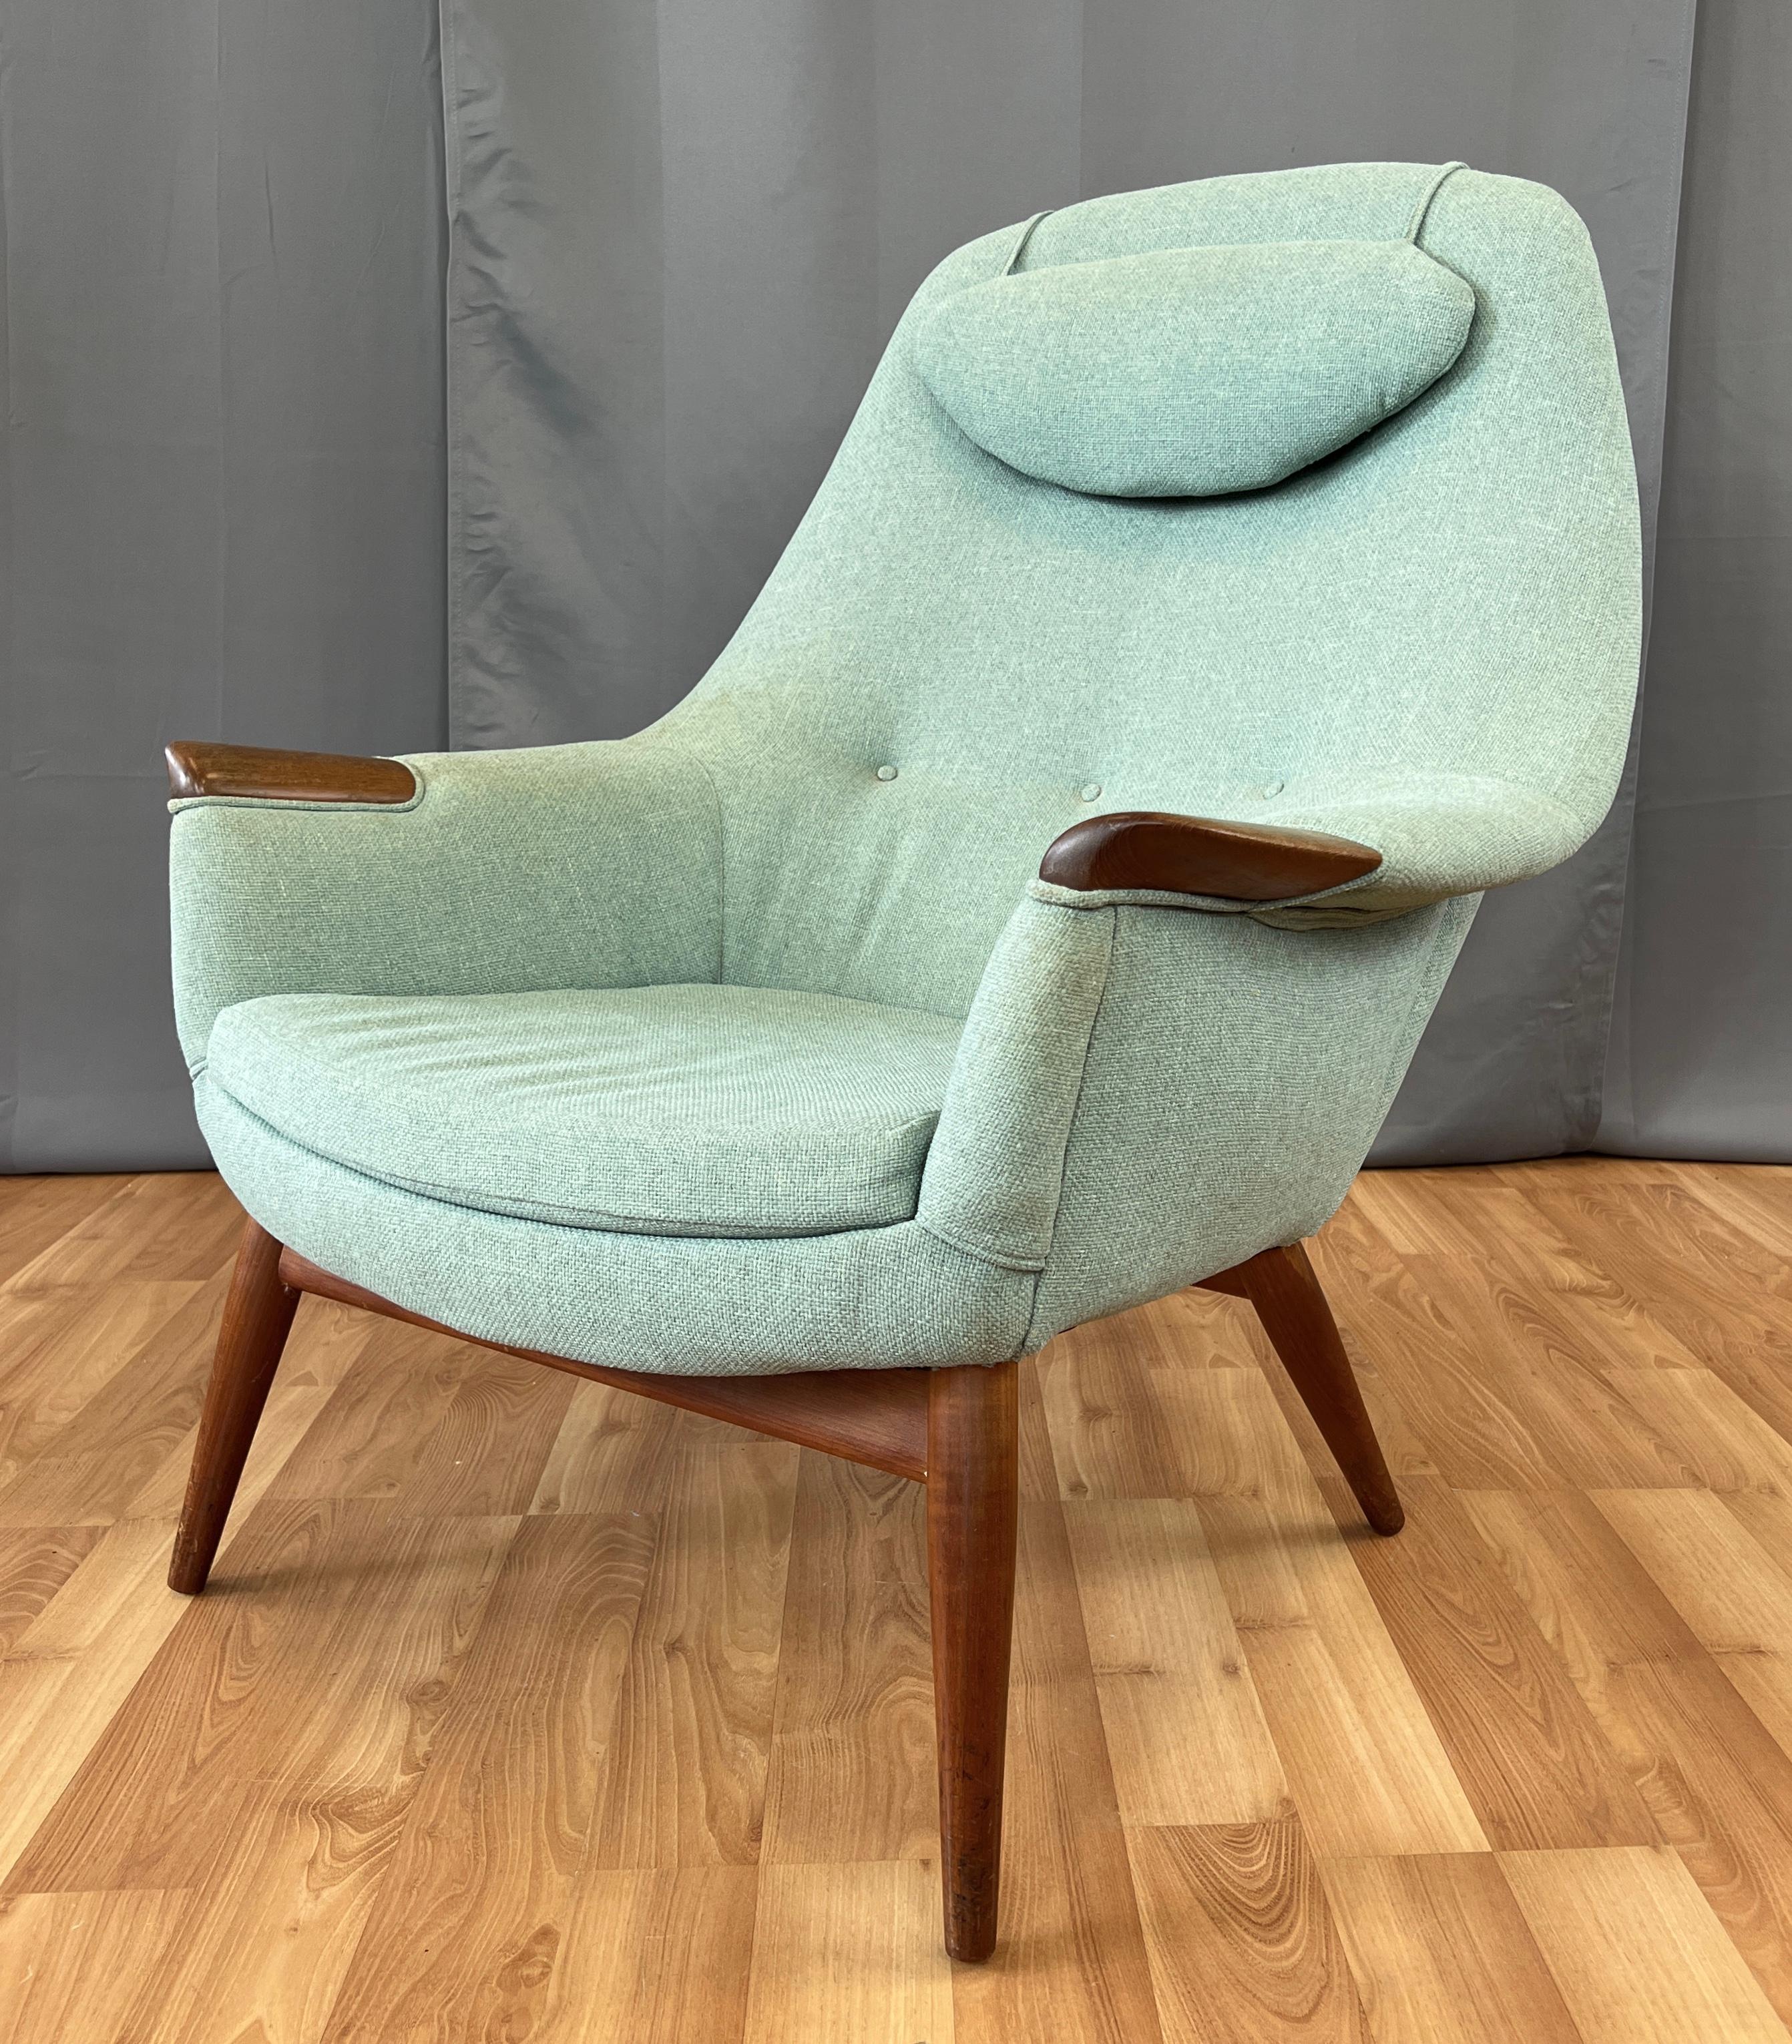 Offered here is a circa 1950s Danish lounge chair with a high curved back, and at it's arms ends Teak paws.
A weighted head rest hangs from it's back rest. Chair has great bones, just waiting to be refinished and recovered to match
your decor.